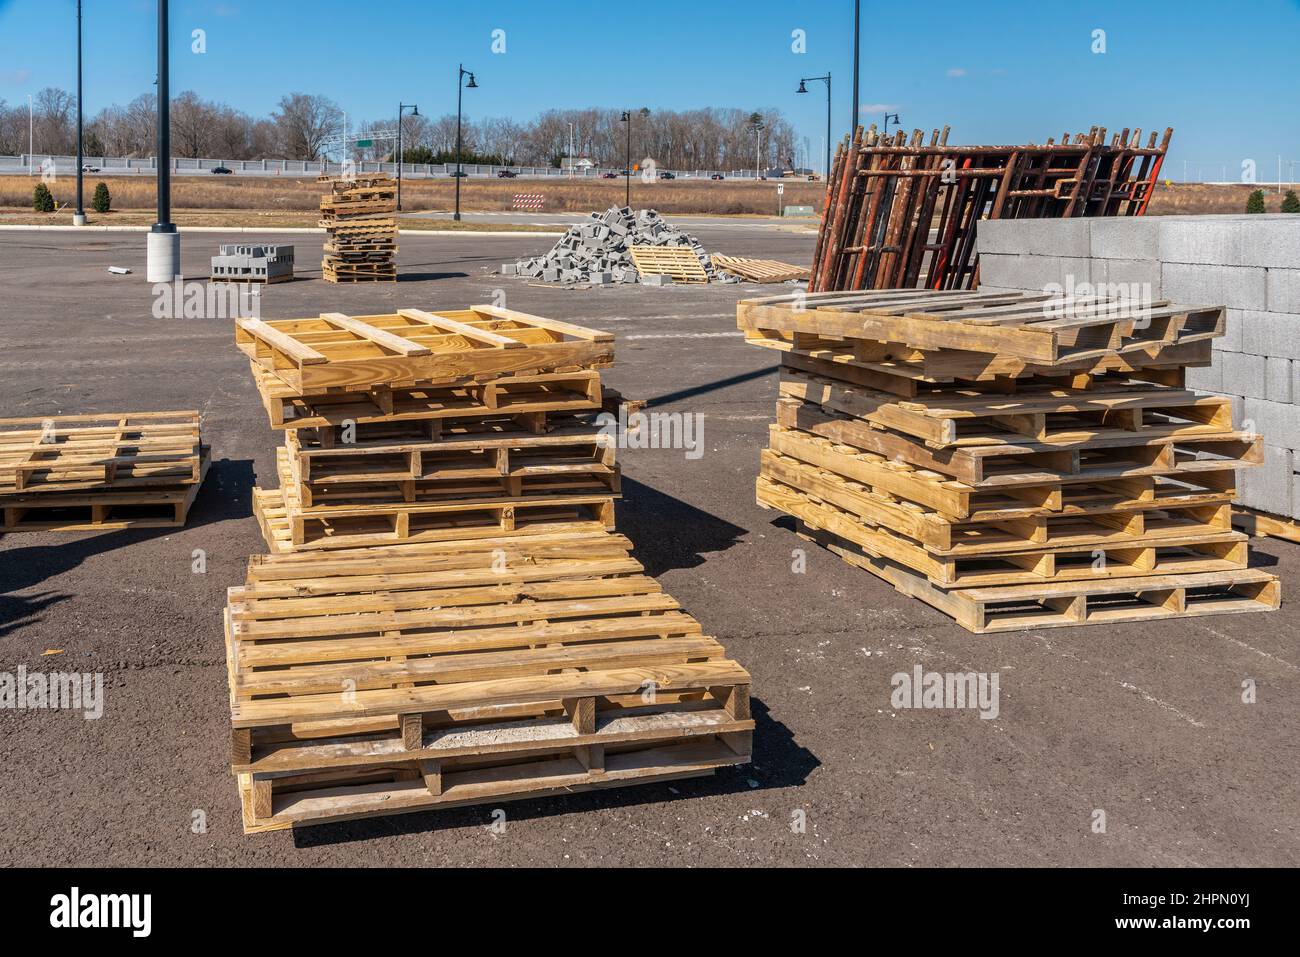 Horizontal shot of piles of wooden pallets and other supplies at an industrial construction site. Stock Photo